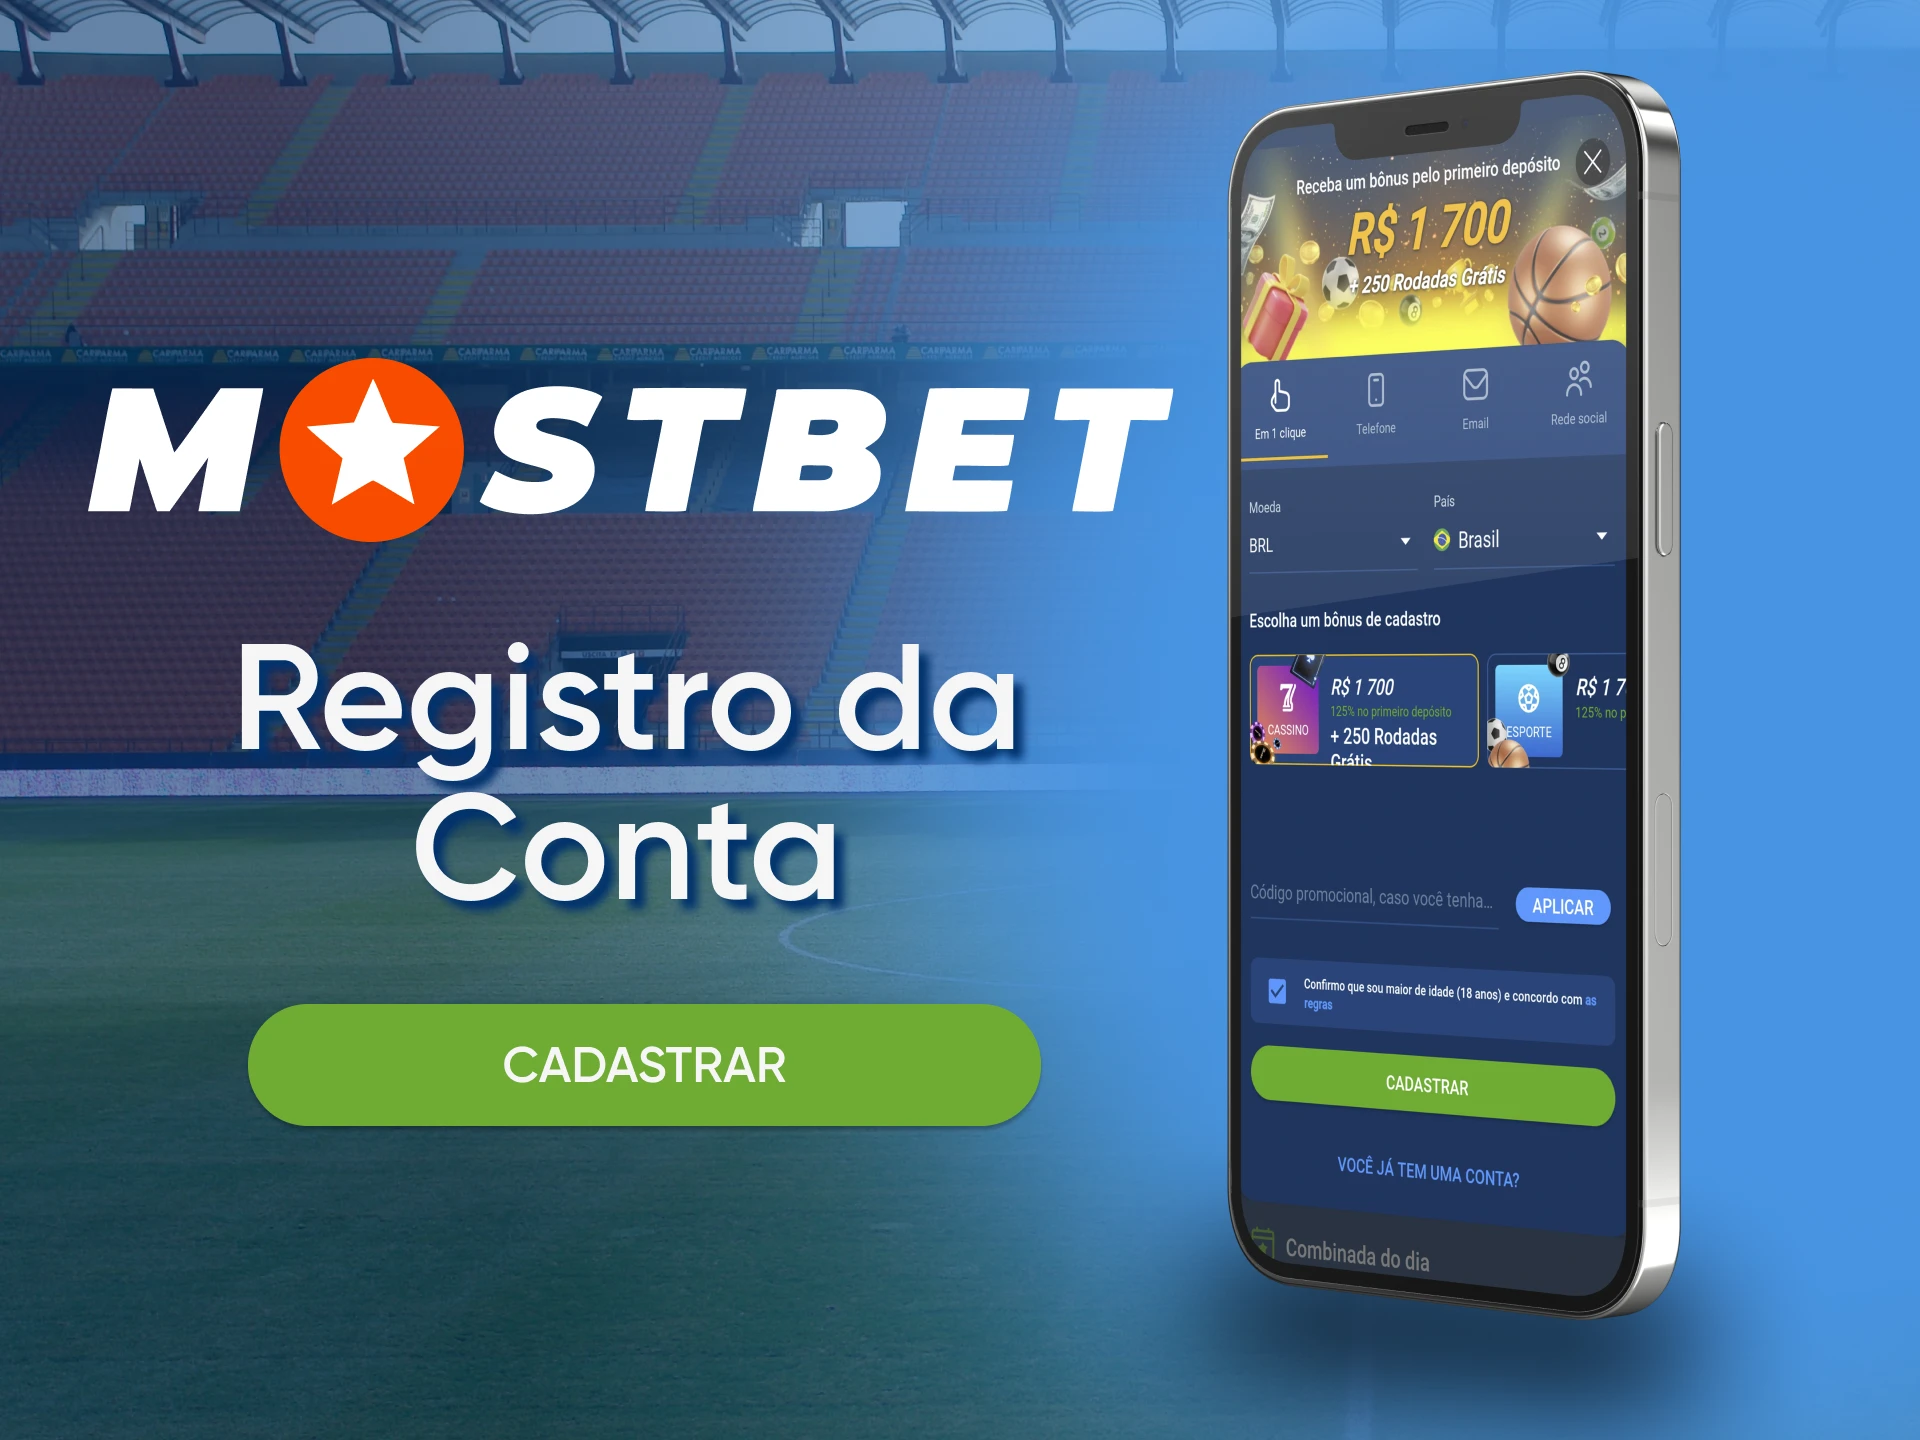 Register with Mostbet with this instruction.